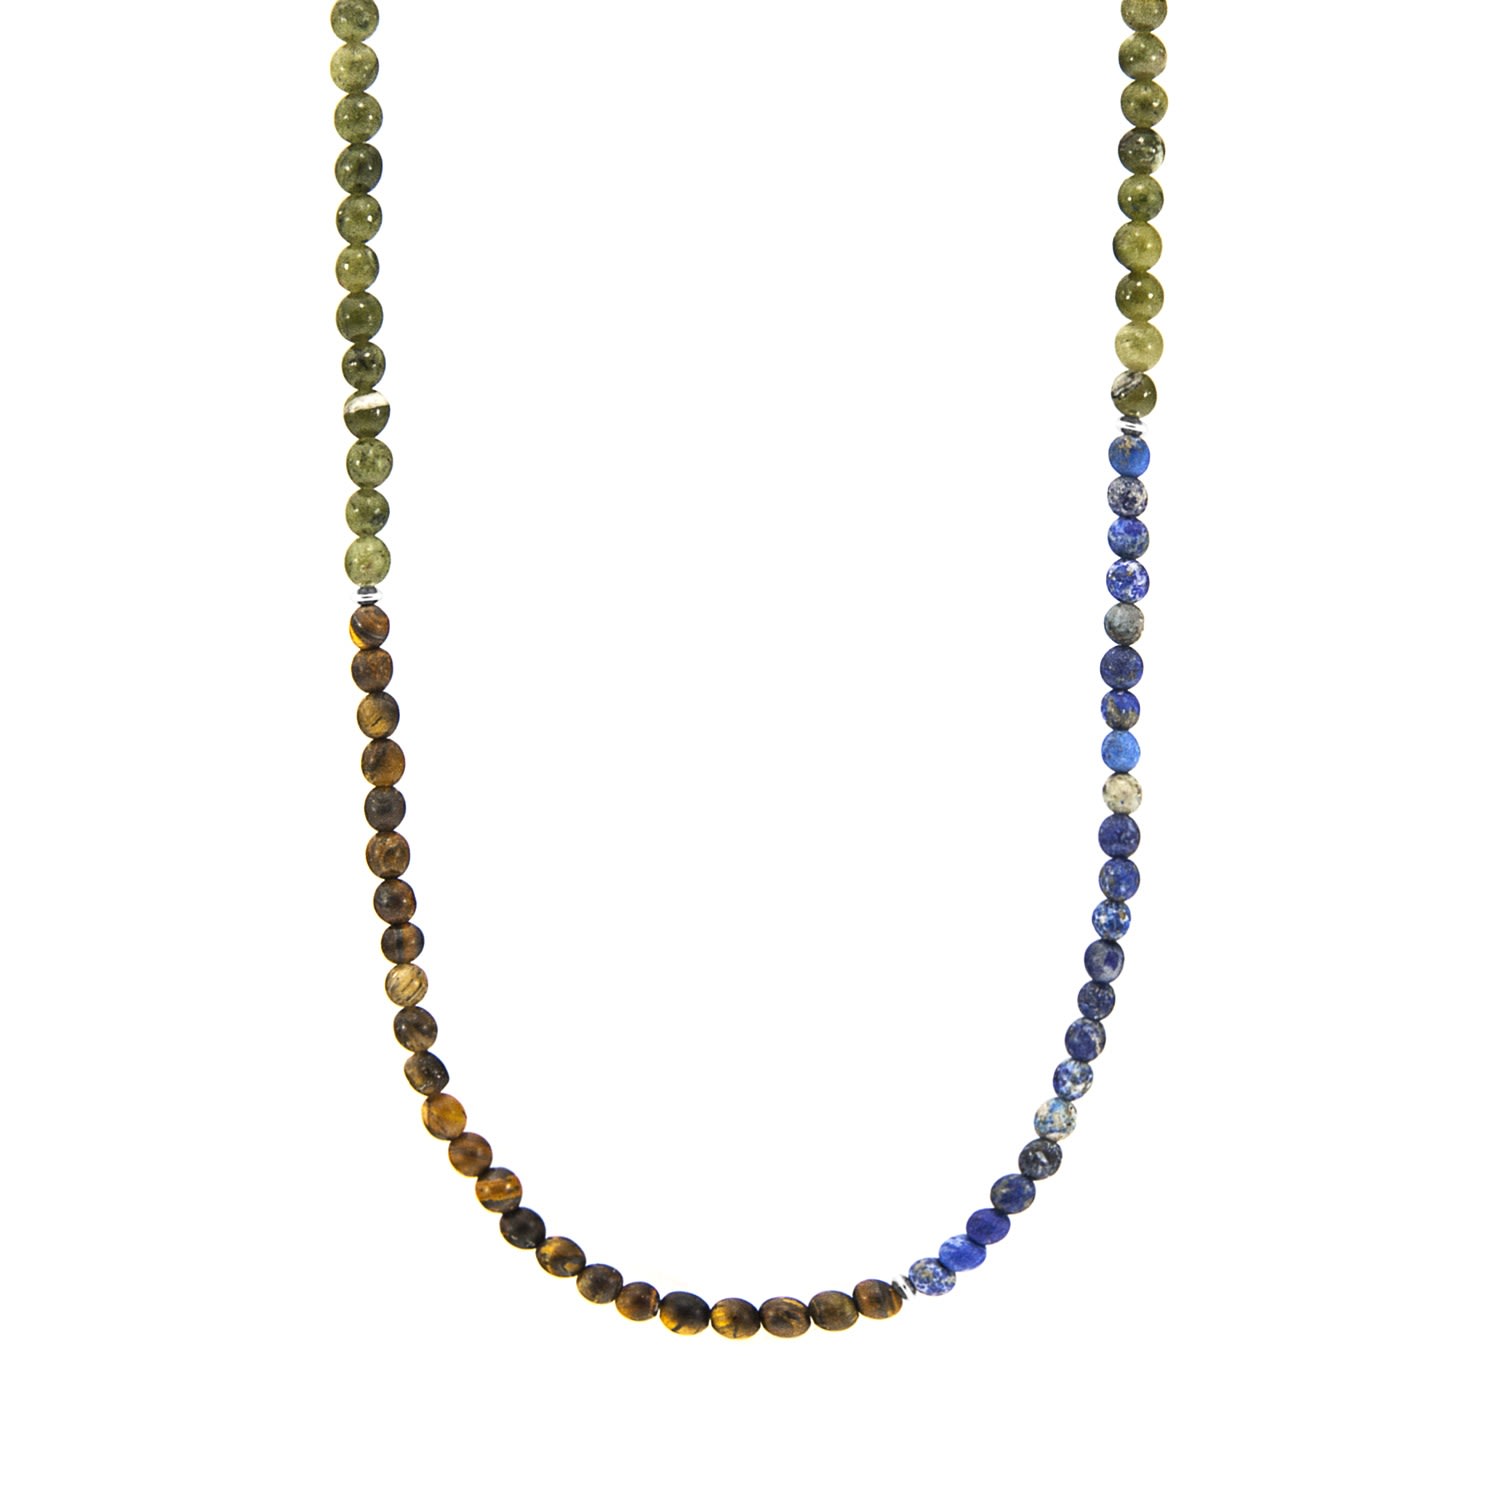 Men's Brown Tigers Eye, Blue Sodalite & Green Jade Isaac Silver & Stone Skinny Necklace X Wrap Bracelet ANCHOR & CREW